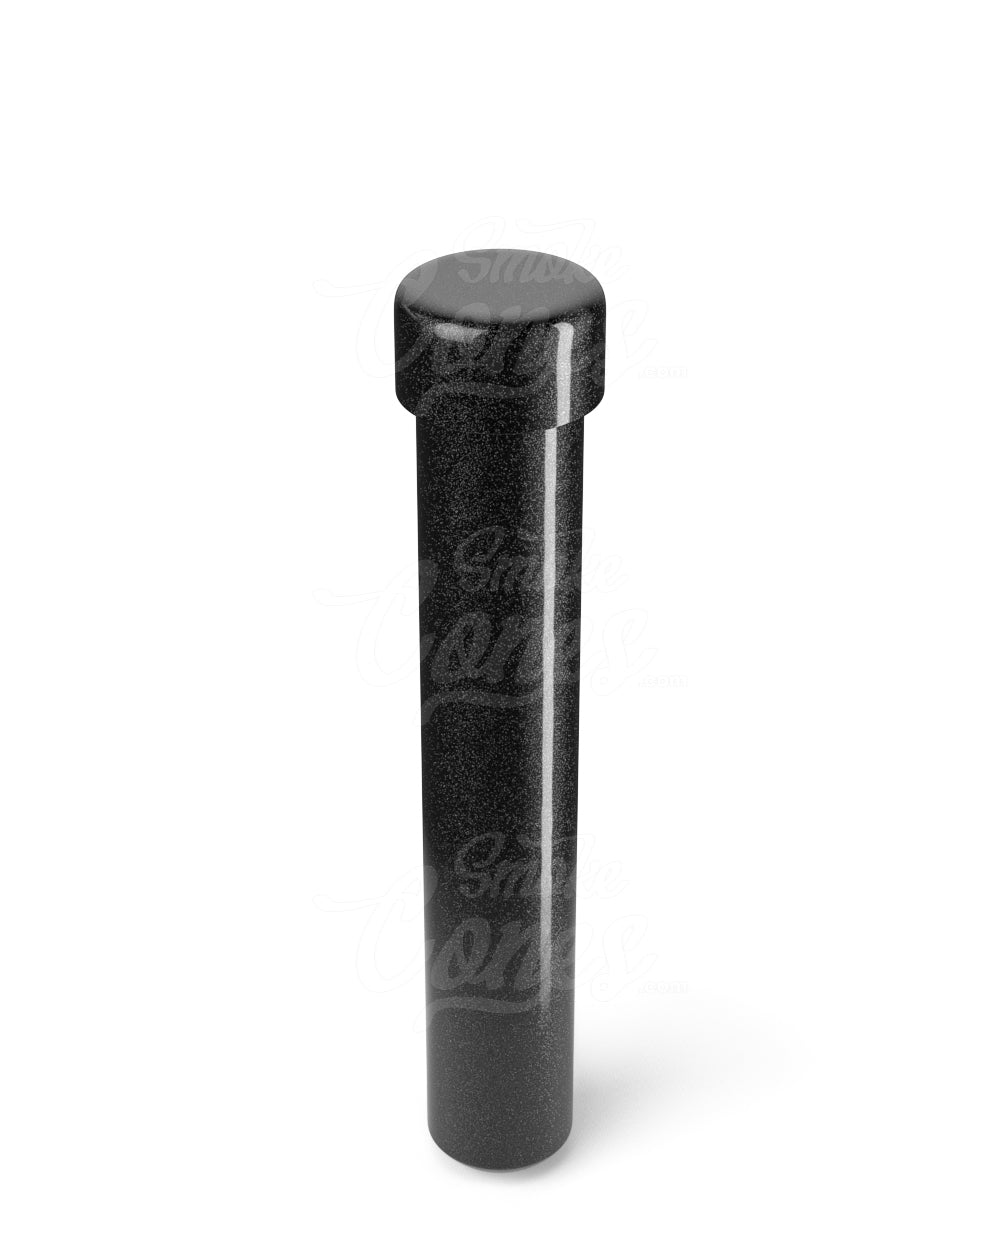 110mm Black Child Resistant Opaque Push Down and Turn Screw On Aluminum Metal Pre-Roll Tubes 250/Box